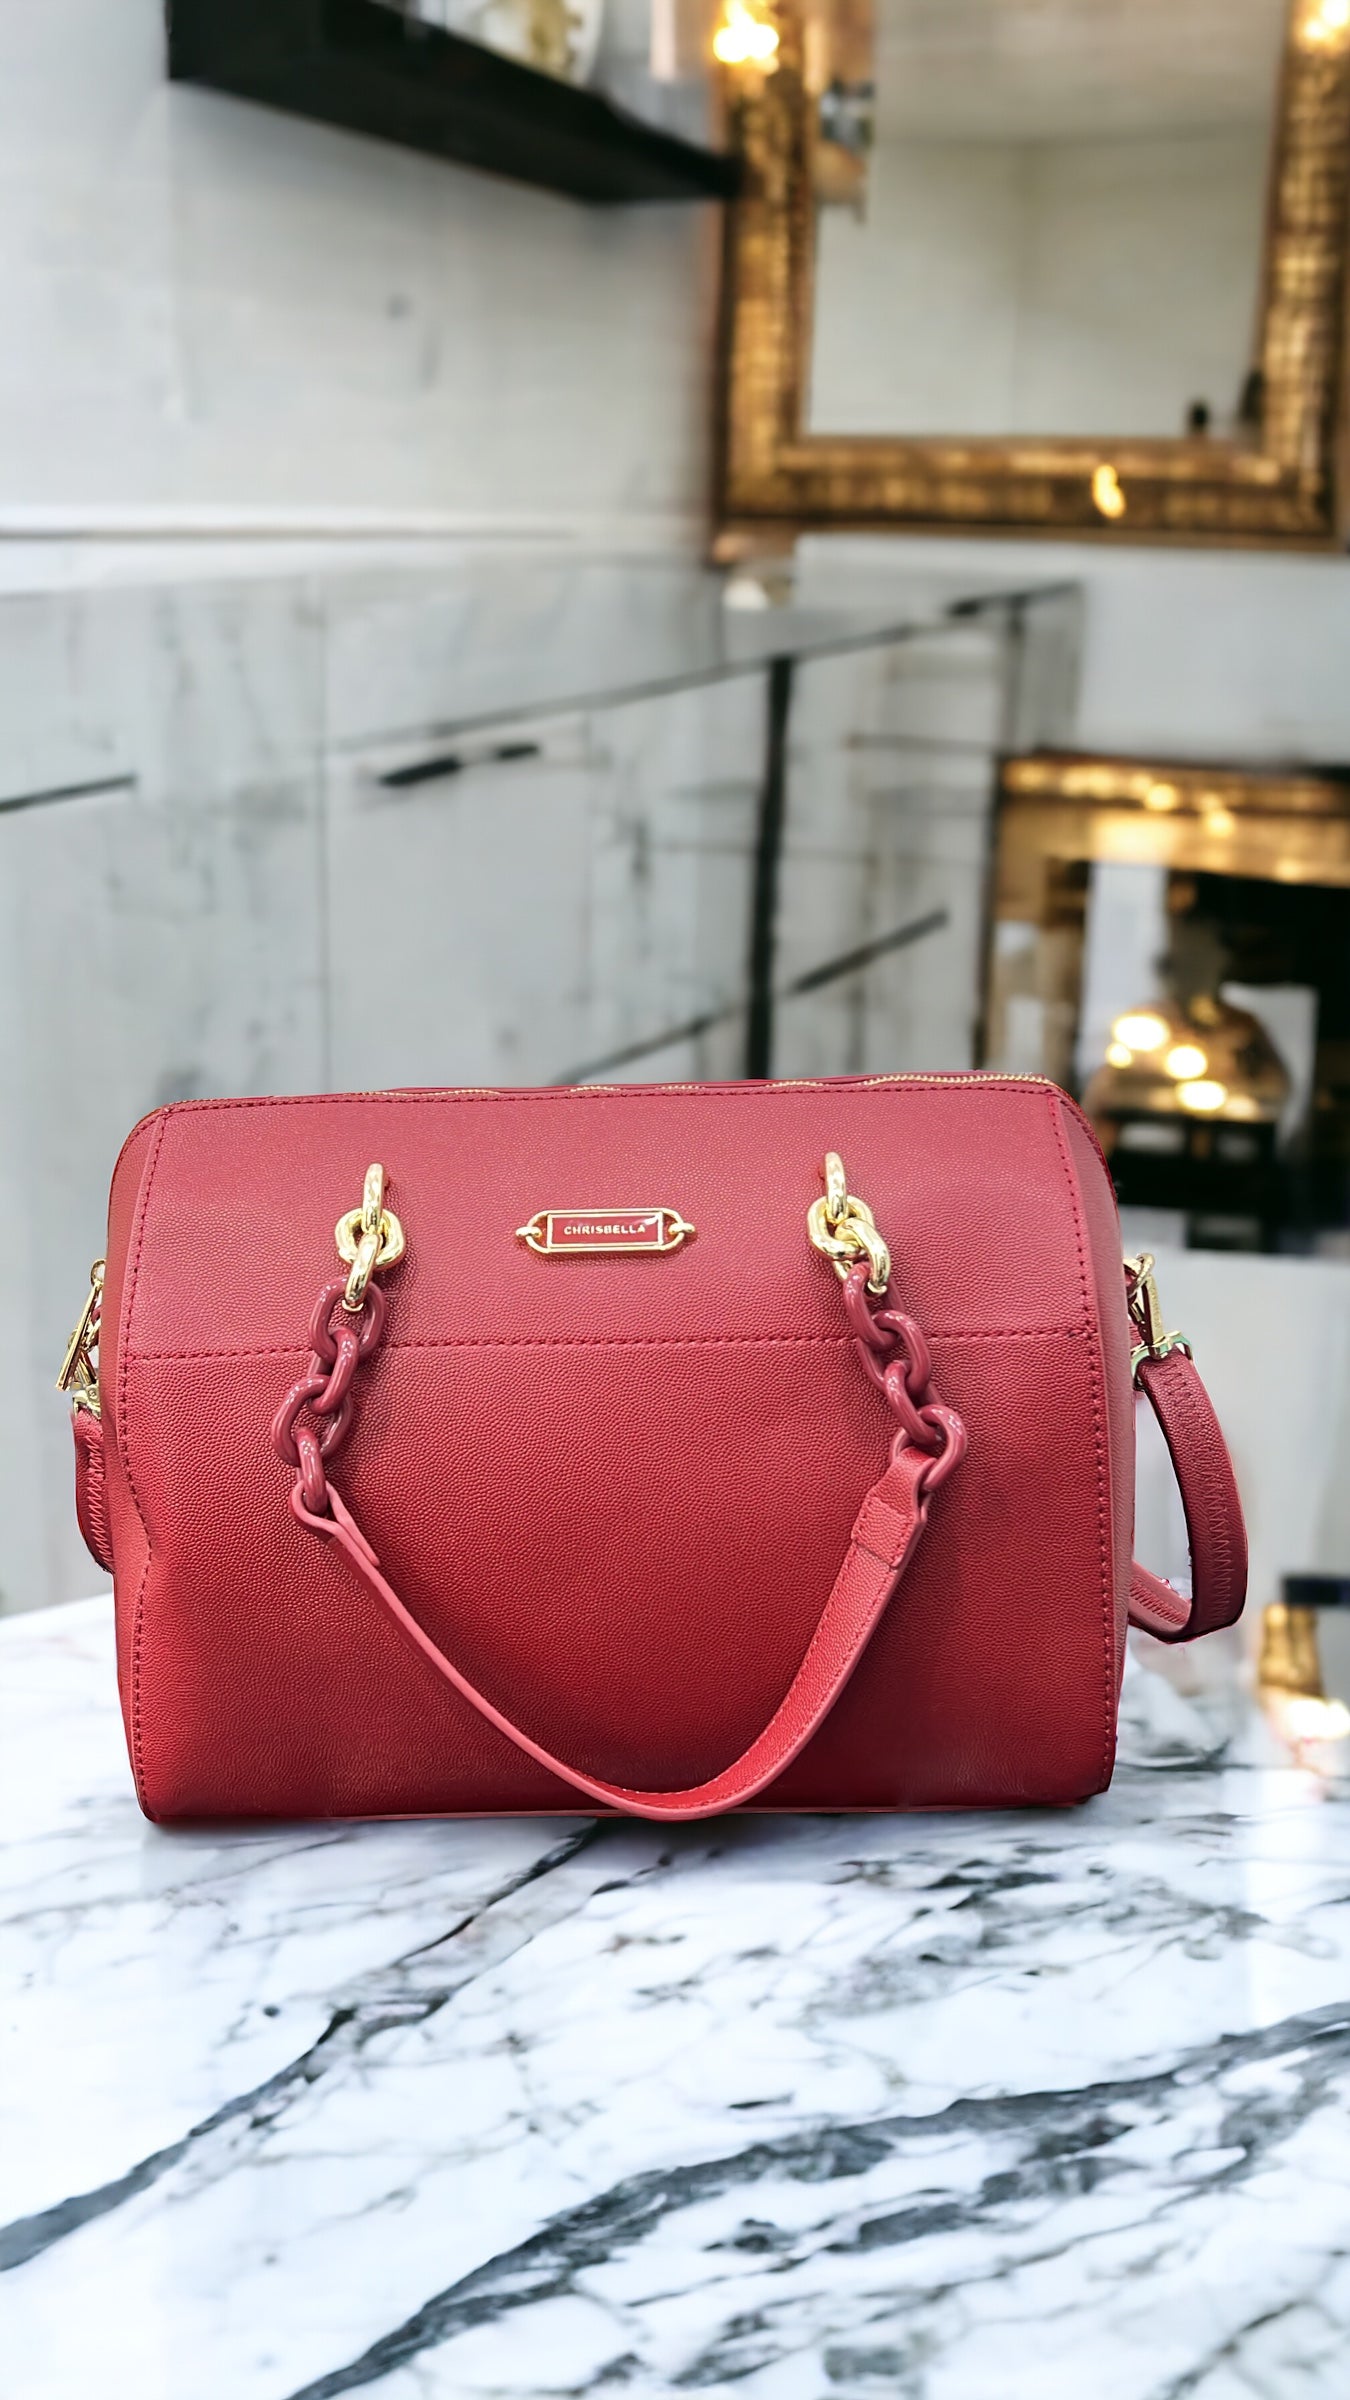 CHRISBELLA TEXTURED DOCTOR BAG IN RED